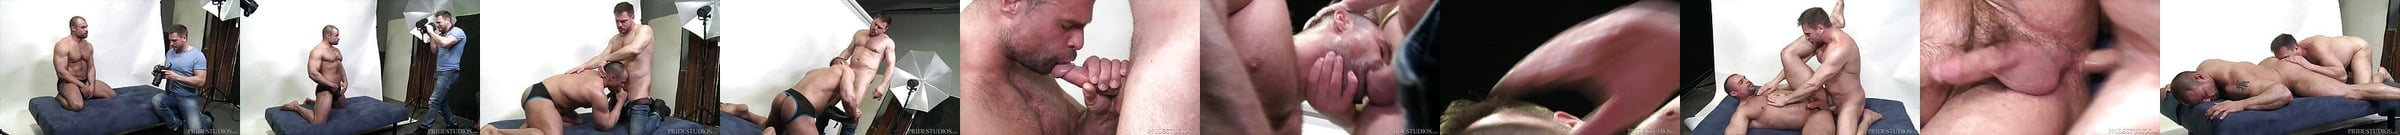 Muscular Bald Amateurs Bareback After Swapping Head